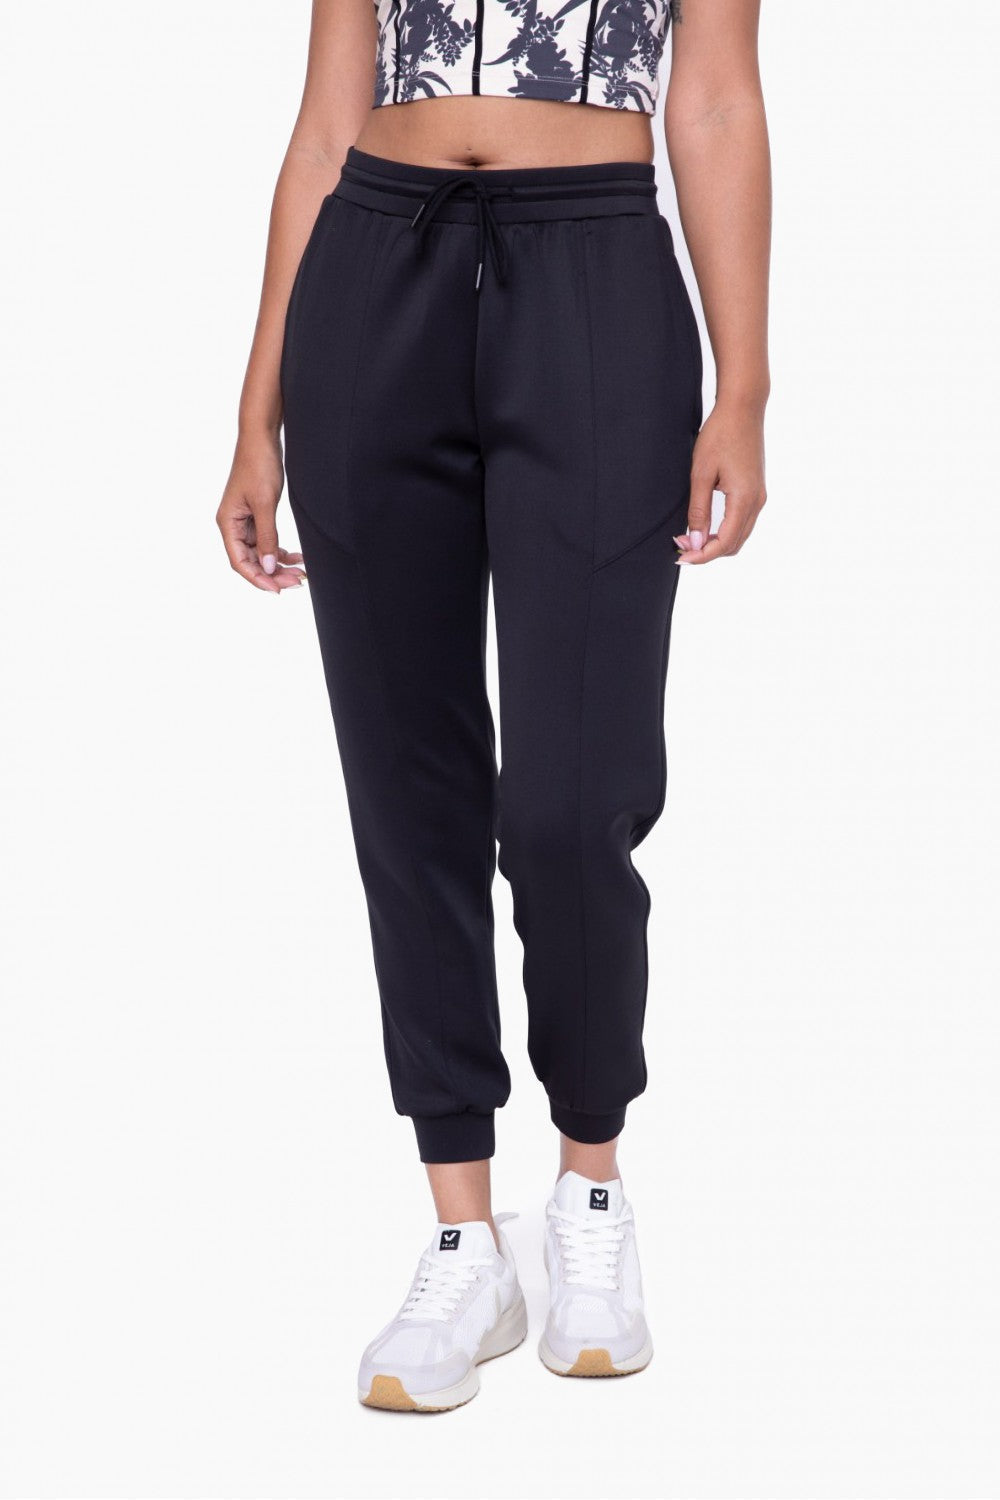 Cuffed Joggers with Zip Pockets - Blk